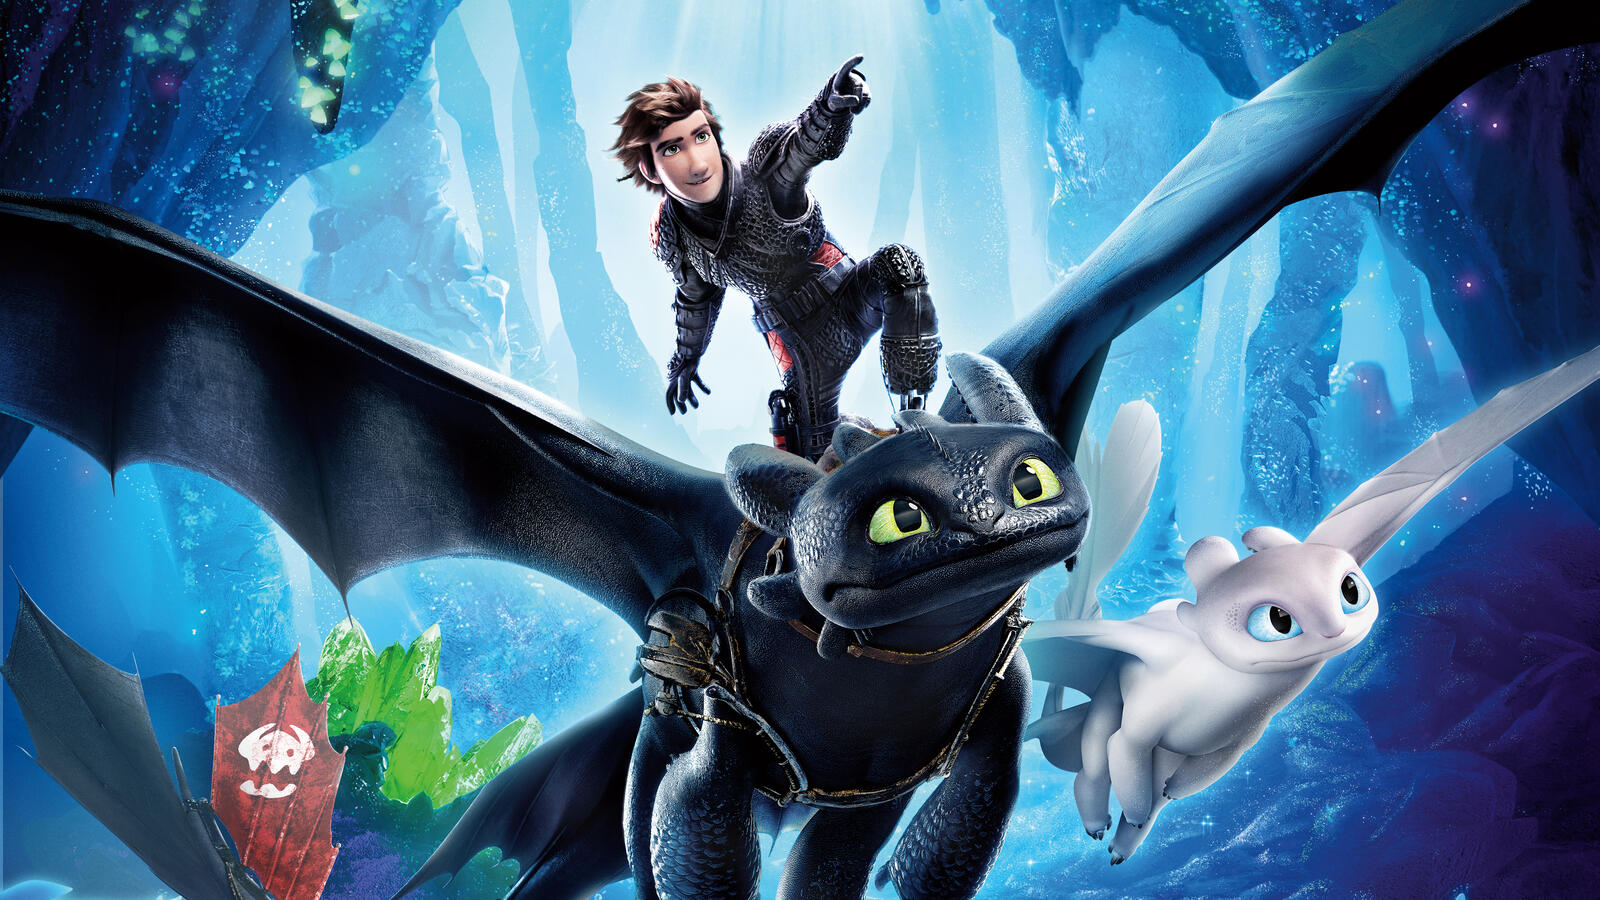 Wallpapers 2019 Movies illustrations How To Train Your Dragon The Hidden World on the desktop